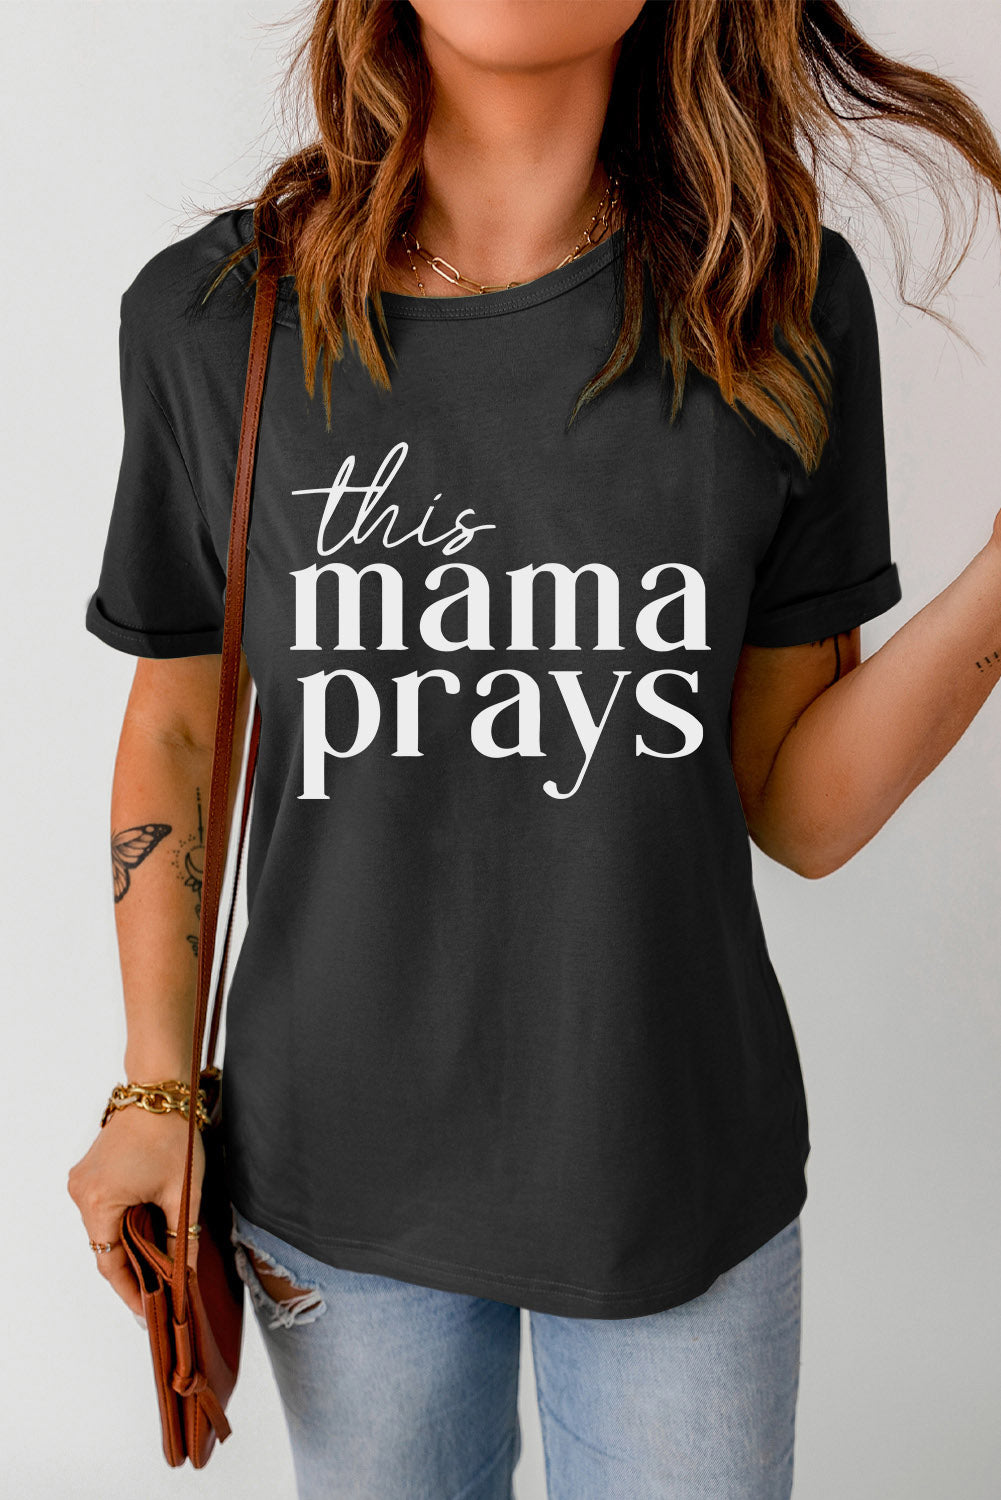 THIS MAMA PRAYS Graphic Tee - Cheeky Chic Boutique